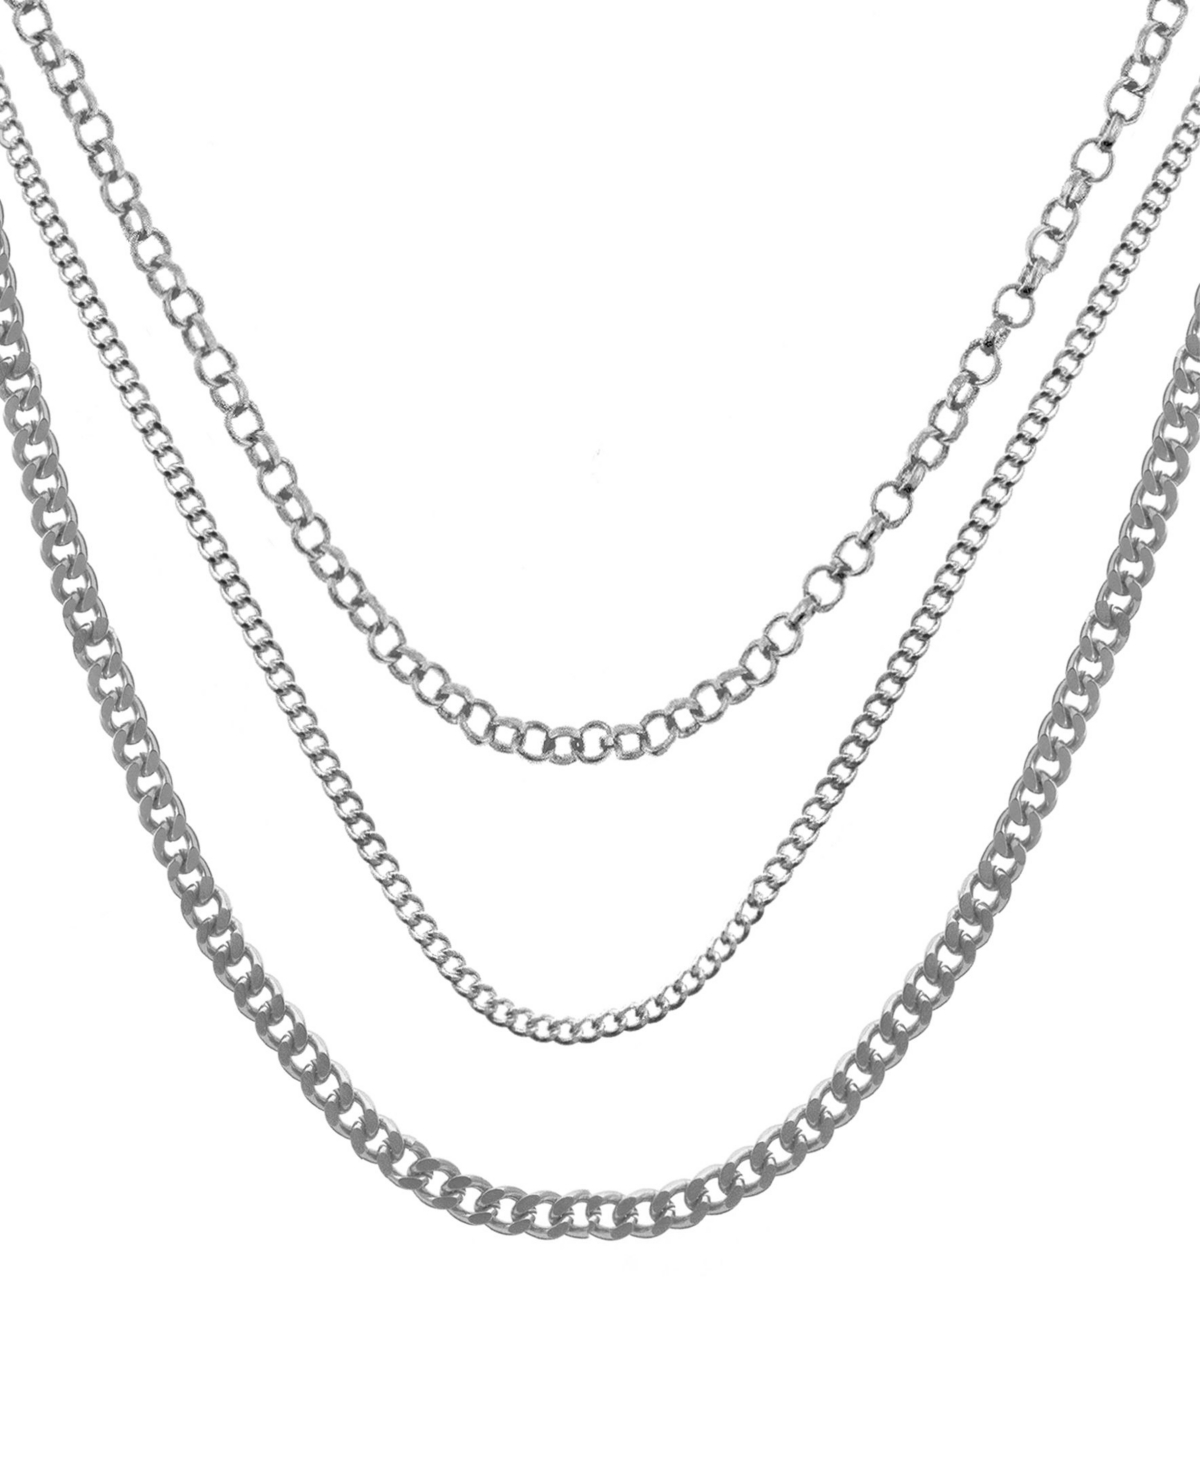 Silver Plated Layered Oval Chain Necklace 15.25", 17.5" and 19.5" + 2" extender - Silver Plated